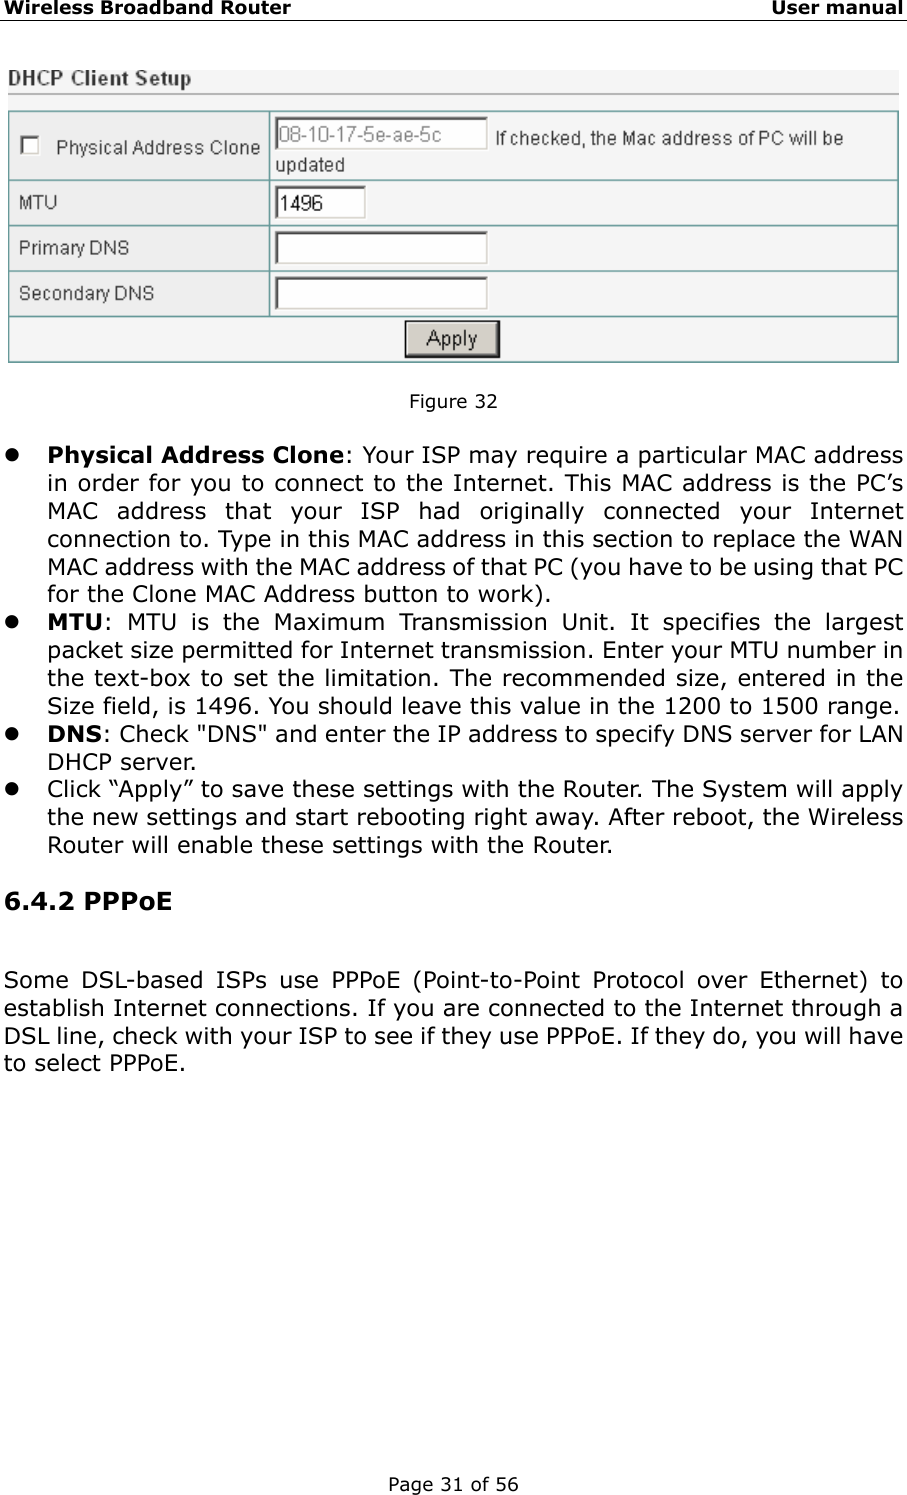 Wireless Broadband Router                                                   User manual Page 31 of 56   Figure 32  z Physical Address Clone: Your ISP may require a particular MAC address in order for you to connect to the Internet. This MAC address is the PC’s MAC address that your ISP had originally connected your Internet connection to. Type in this MAC address in this section to replace the WAN MAC address with the MAC address of that PC (you have to be using that PC for the Clone MAC Address button to work).   z MTU: MTU is the Maximum Transmission Unit. It specifies the largest packet size permitted for Internet transmission. Enter your MTU number in the text-box to set the limitation. The recommended size, entered in the Size field, is 1496. You should leave this value in the 1200 to 1500 range. z DNS: Check &quot;DNS&quot; and enter the IP address to specify DNS server for LAN DHCP server. z Click “Apply” to save these settings with the Router. The System will apply the new settings and start rebooting right away. After reboot, the Wireless Router will enable these settings with the Router. 6.4.2 PPPoE Some DSL-based ISPs use PPPoE (Point-to-Point Protocol over Ethernet) to establish Internet connections. If you are connected to the Internet through a DSL line, check with your ISP to see if they use PPPoE. If they do, you will have to select PPPoE. 